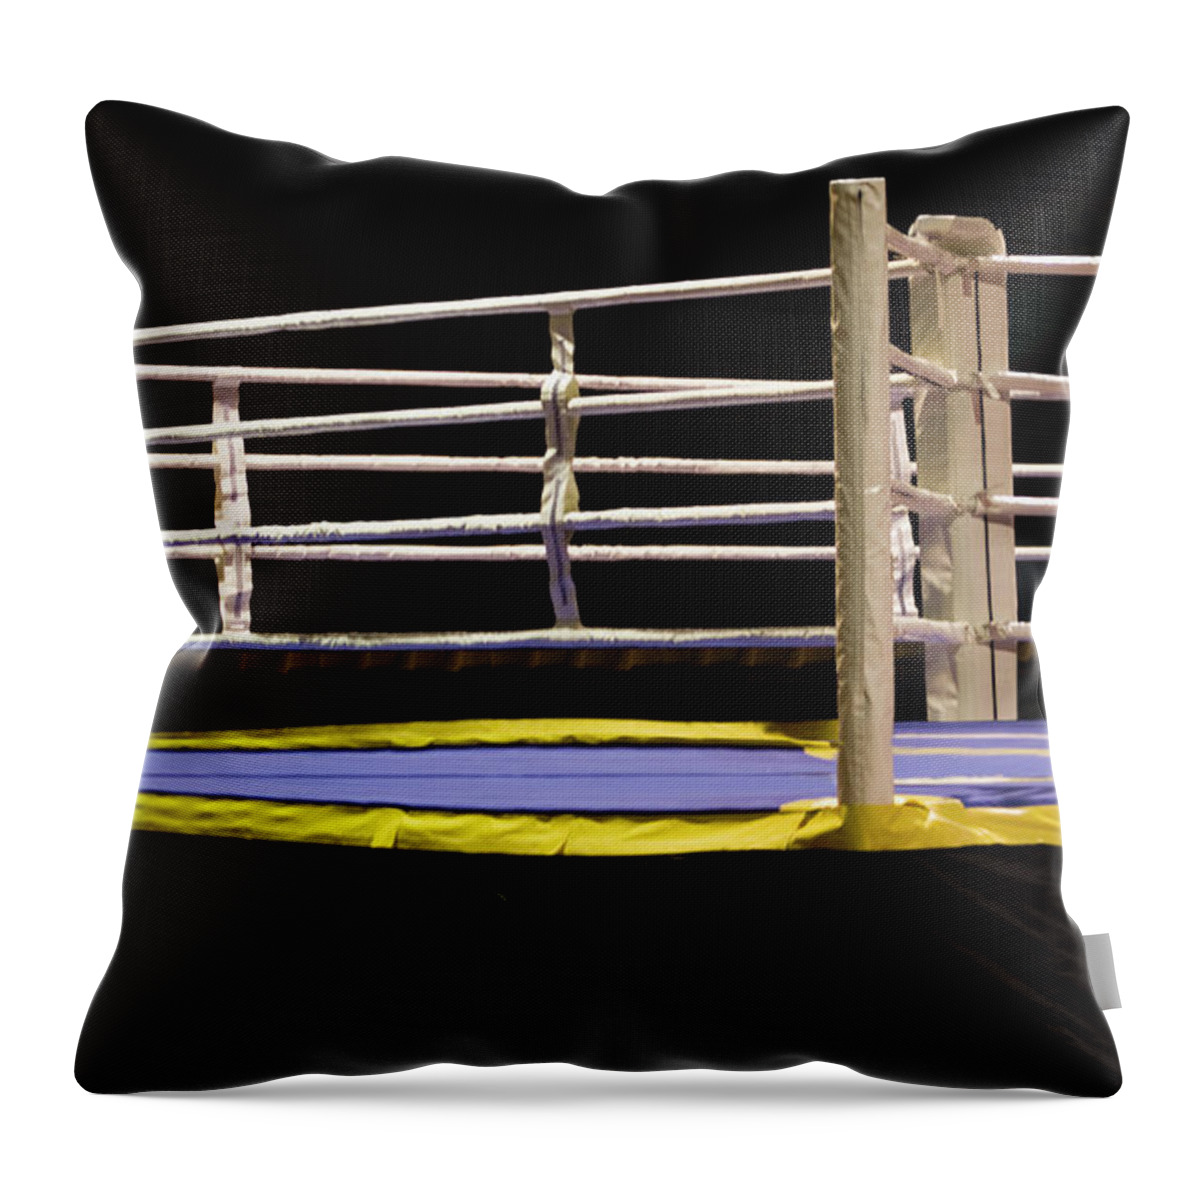 Pole Throw Pillow featuring the photograph Empty Boxing Ring, Palace Of Sports by Win-initiative/neleman